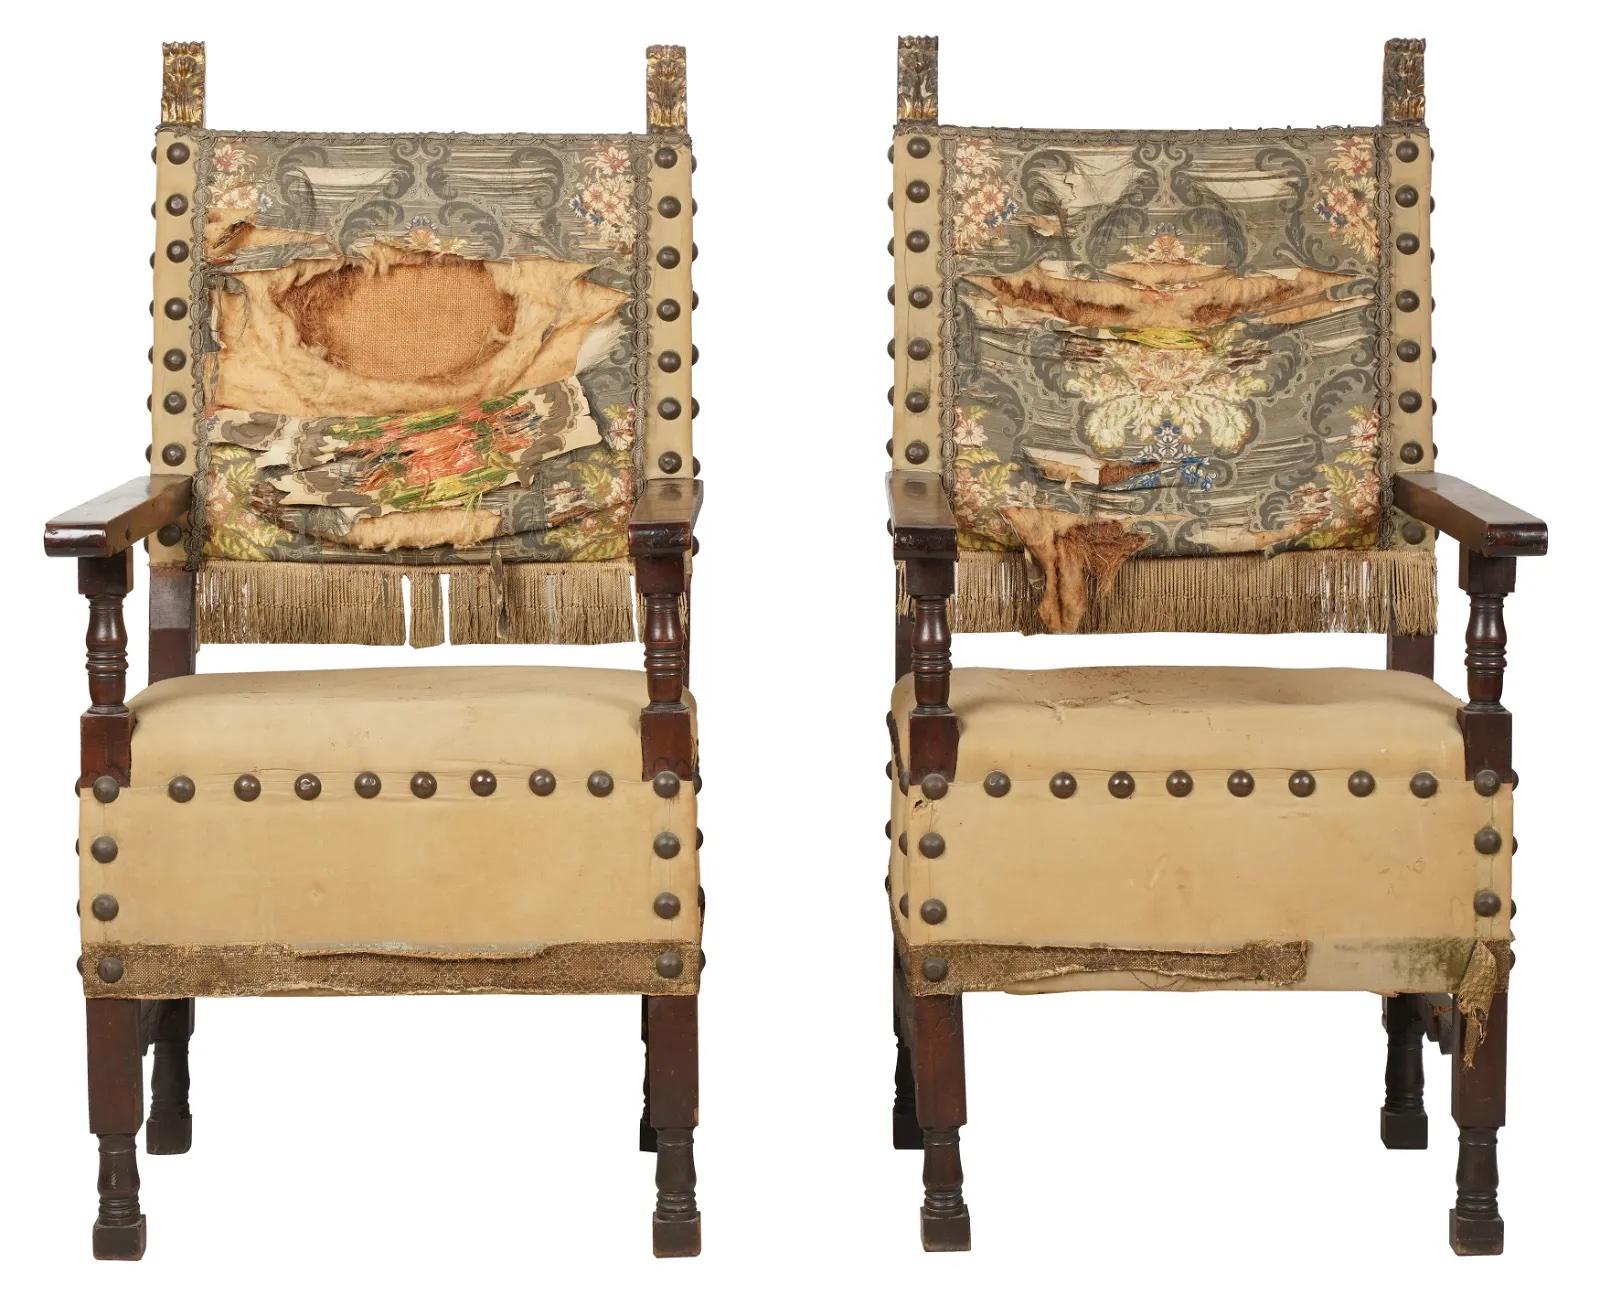 Pair of Large Late 18th C Walnut Spanish Baroque - Spanish Colonial Revival Hall / Throne Armchairs w/ Large Brass Nail Heads. Needing new upholstery. 